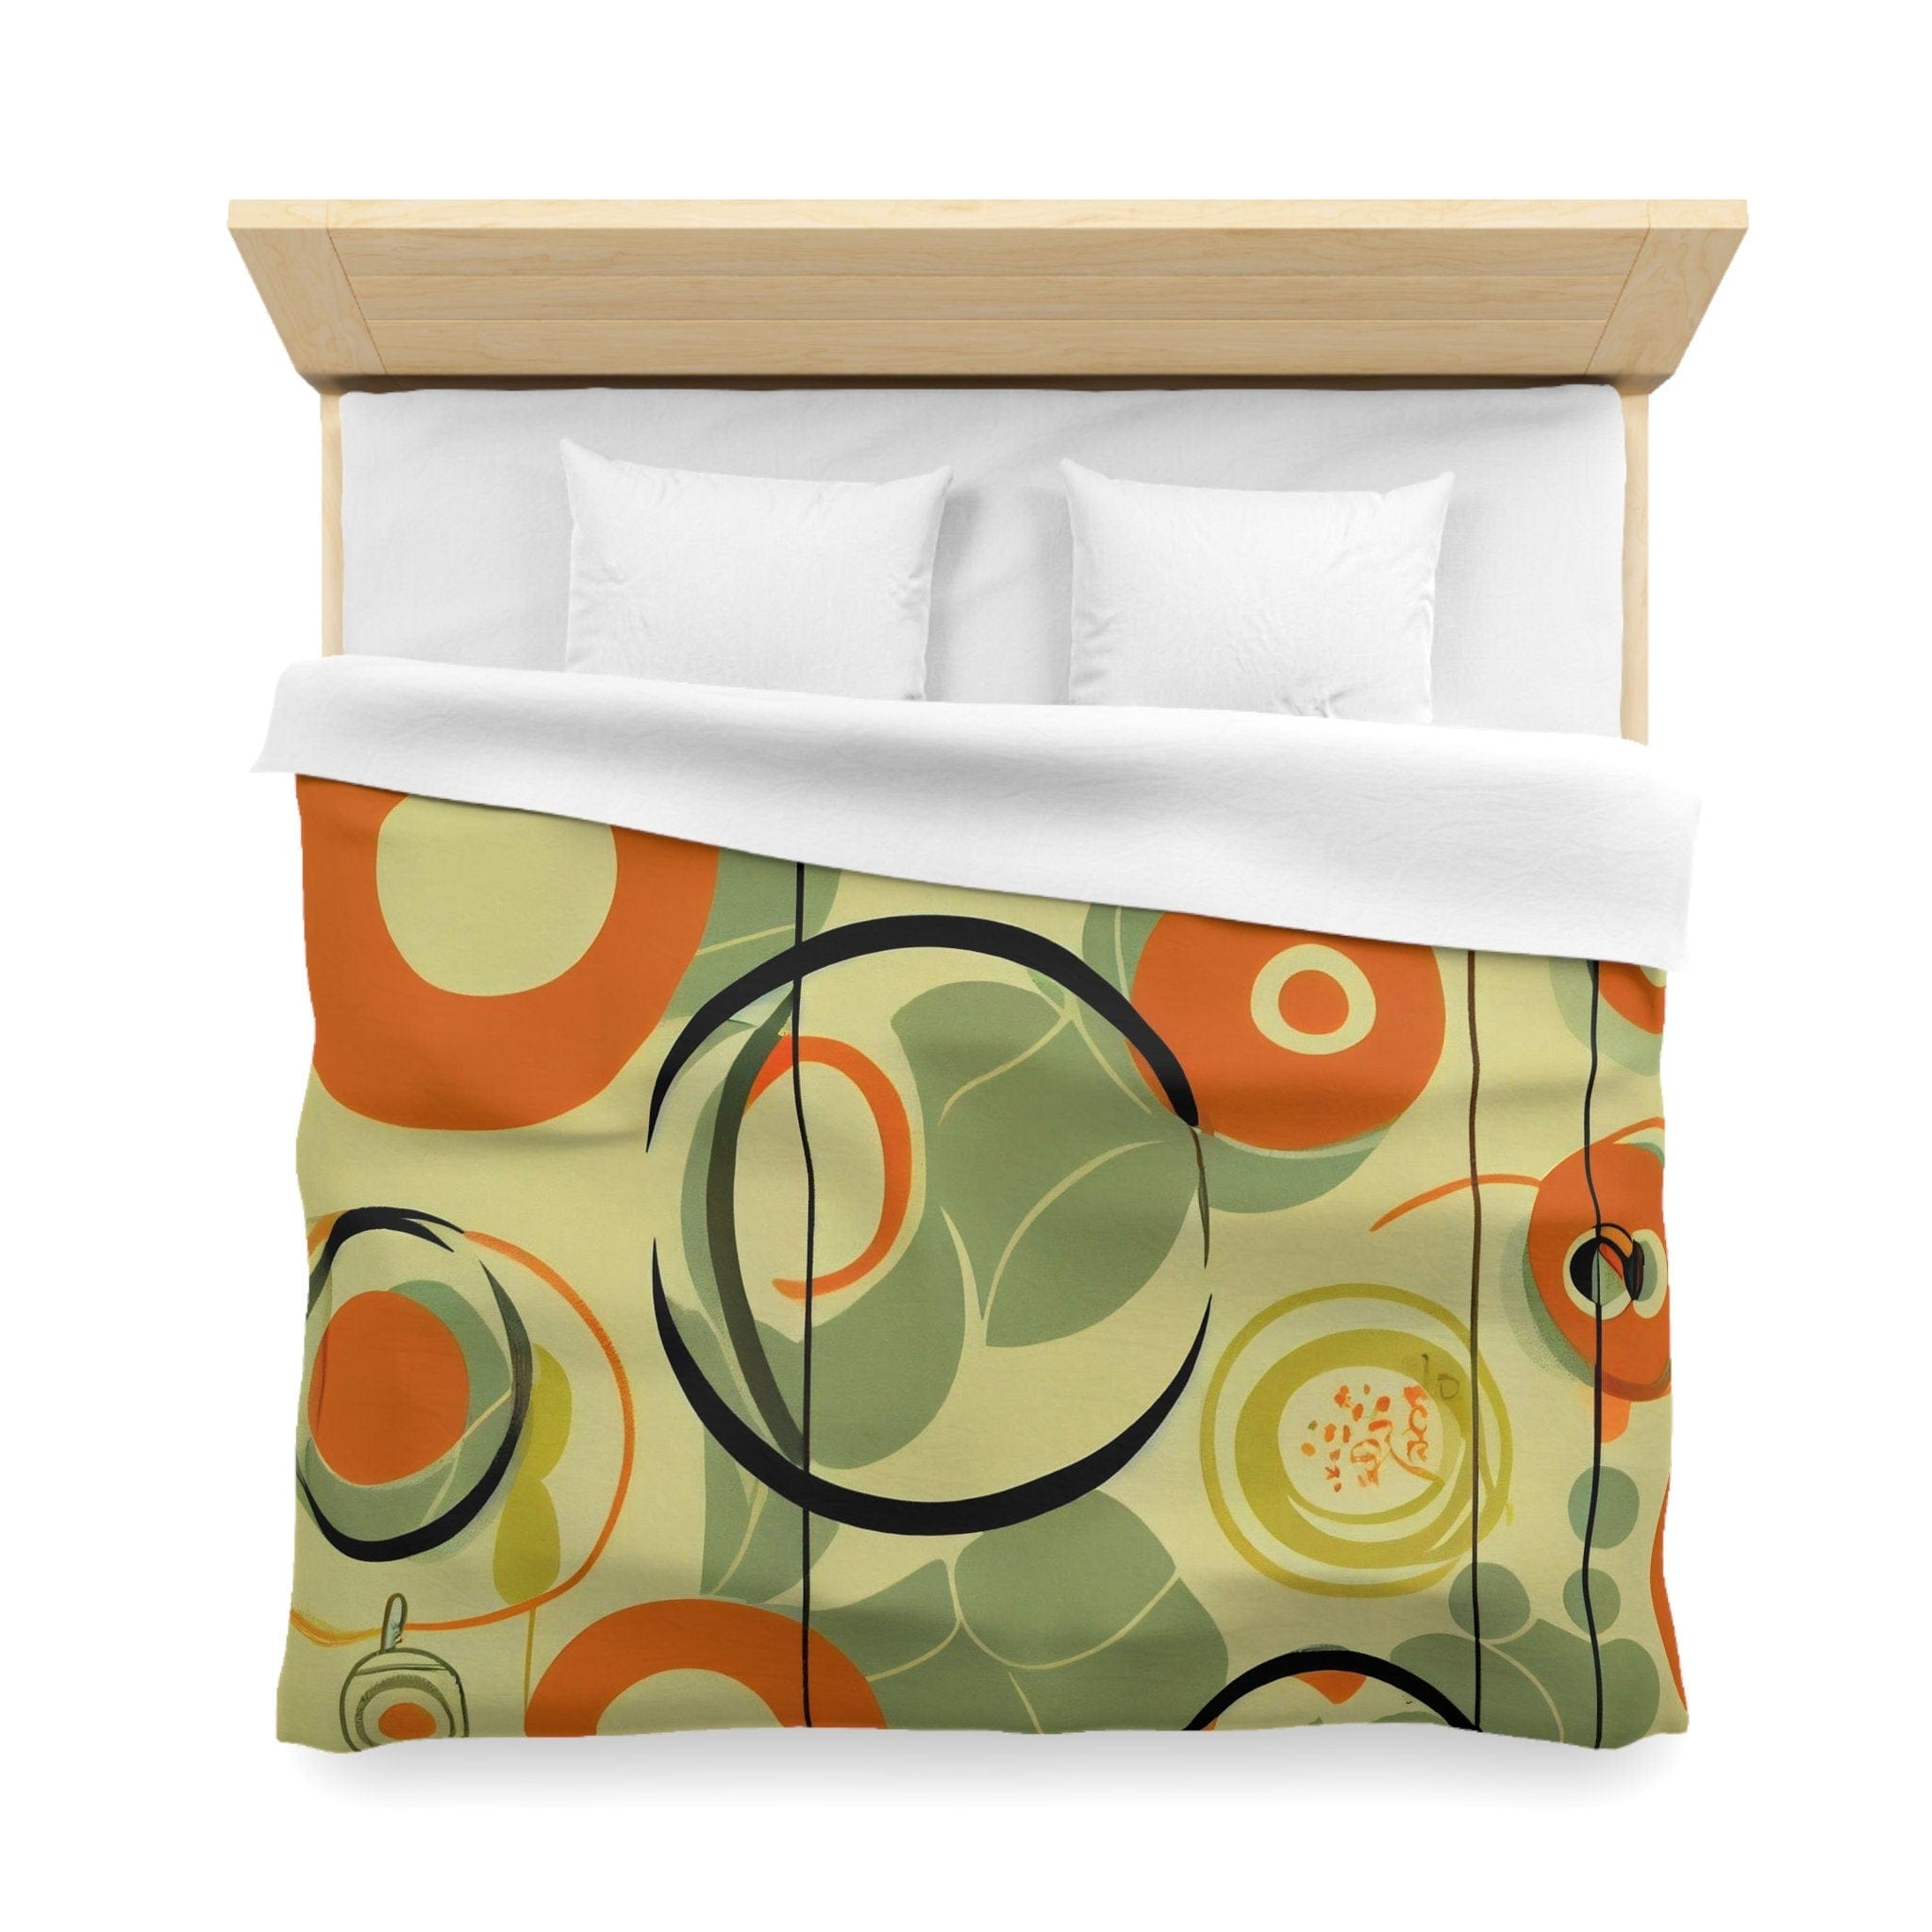 Kate McEnroe New York 70s Mod Abstract Geometric Duvet Cover, Burnt Orange and Green Mid Century Style, Queen, King, Twin, Twin XL Bedding - KM13829923 Duvet Covers